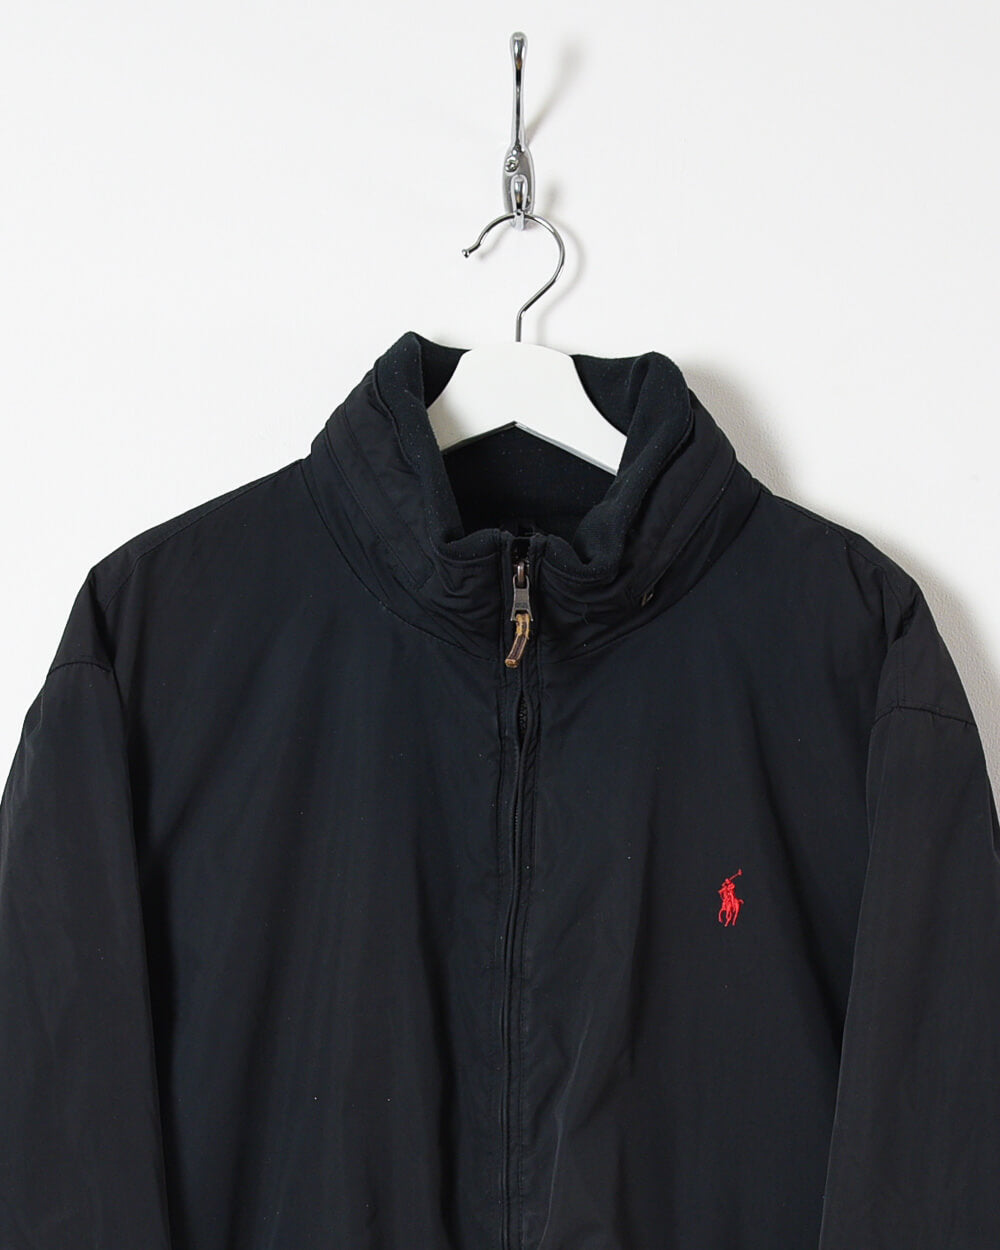 Ralph Lauren Fleece Lined Jacket -X-Large - Domno Vintage 90s, 80s, 00s Retro and Vintage Clothing 